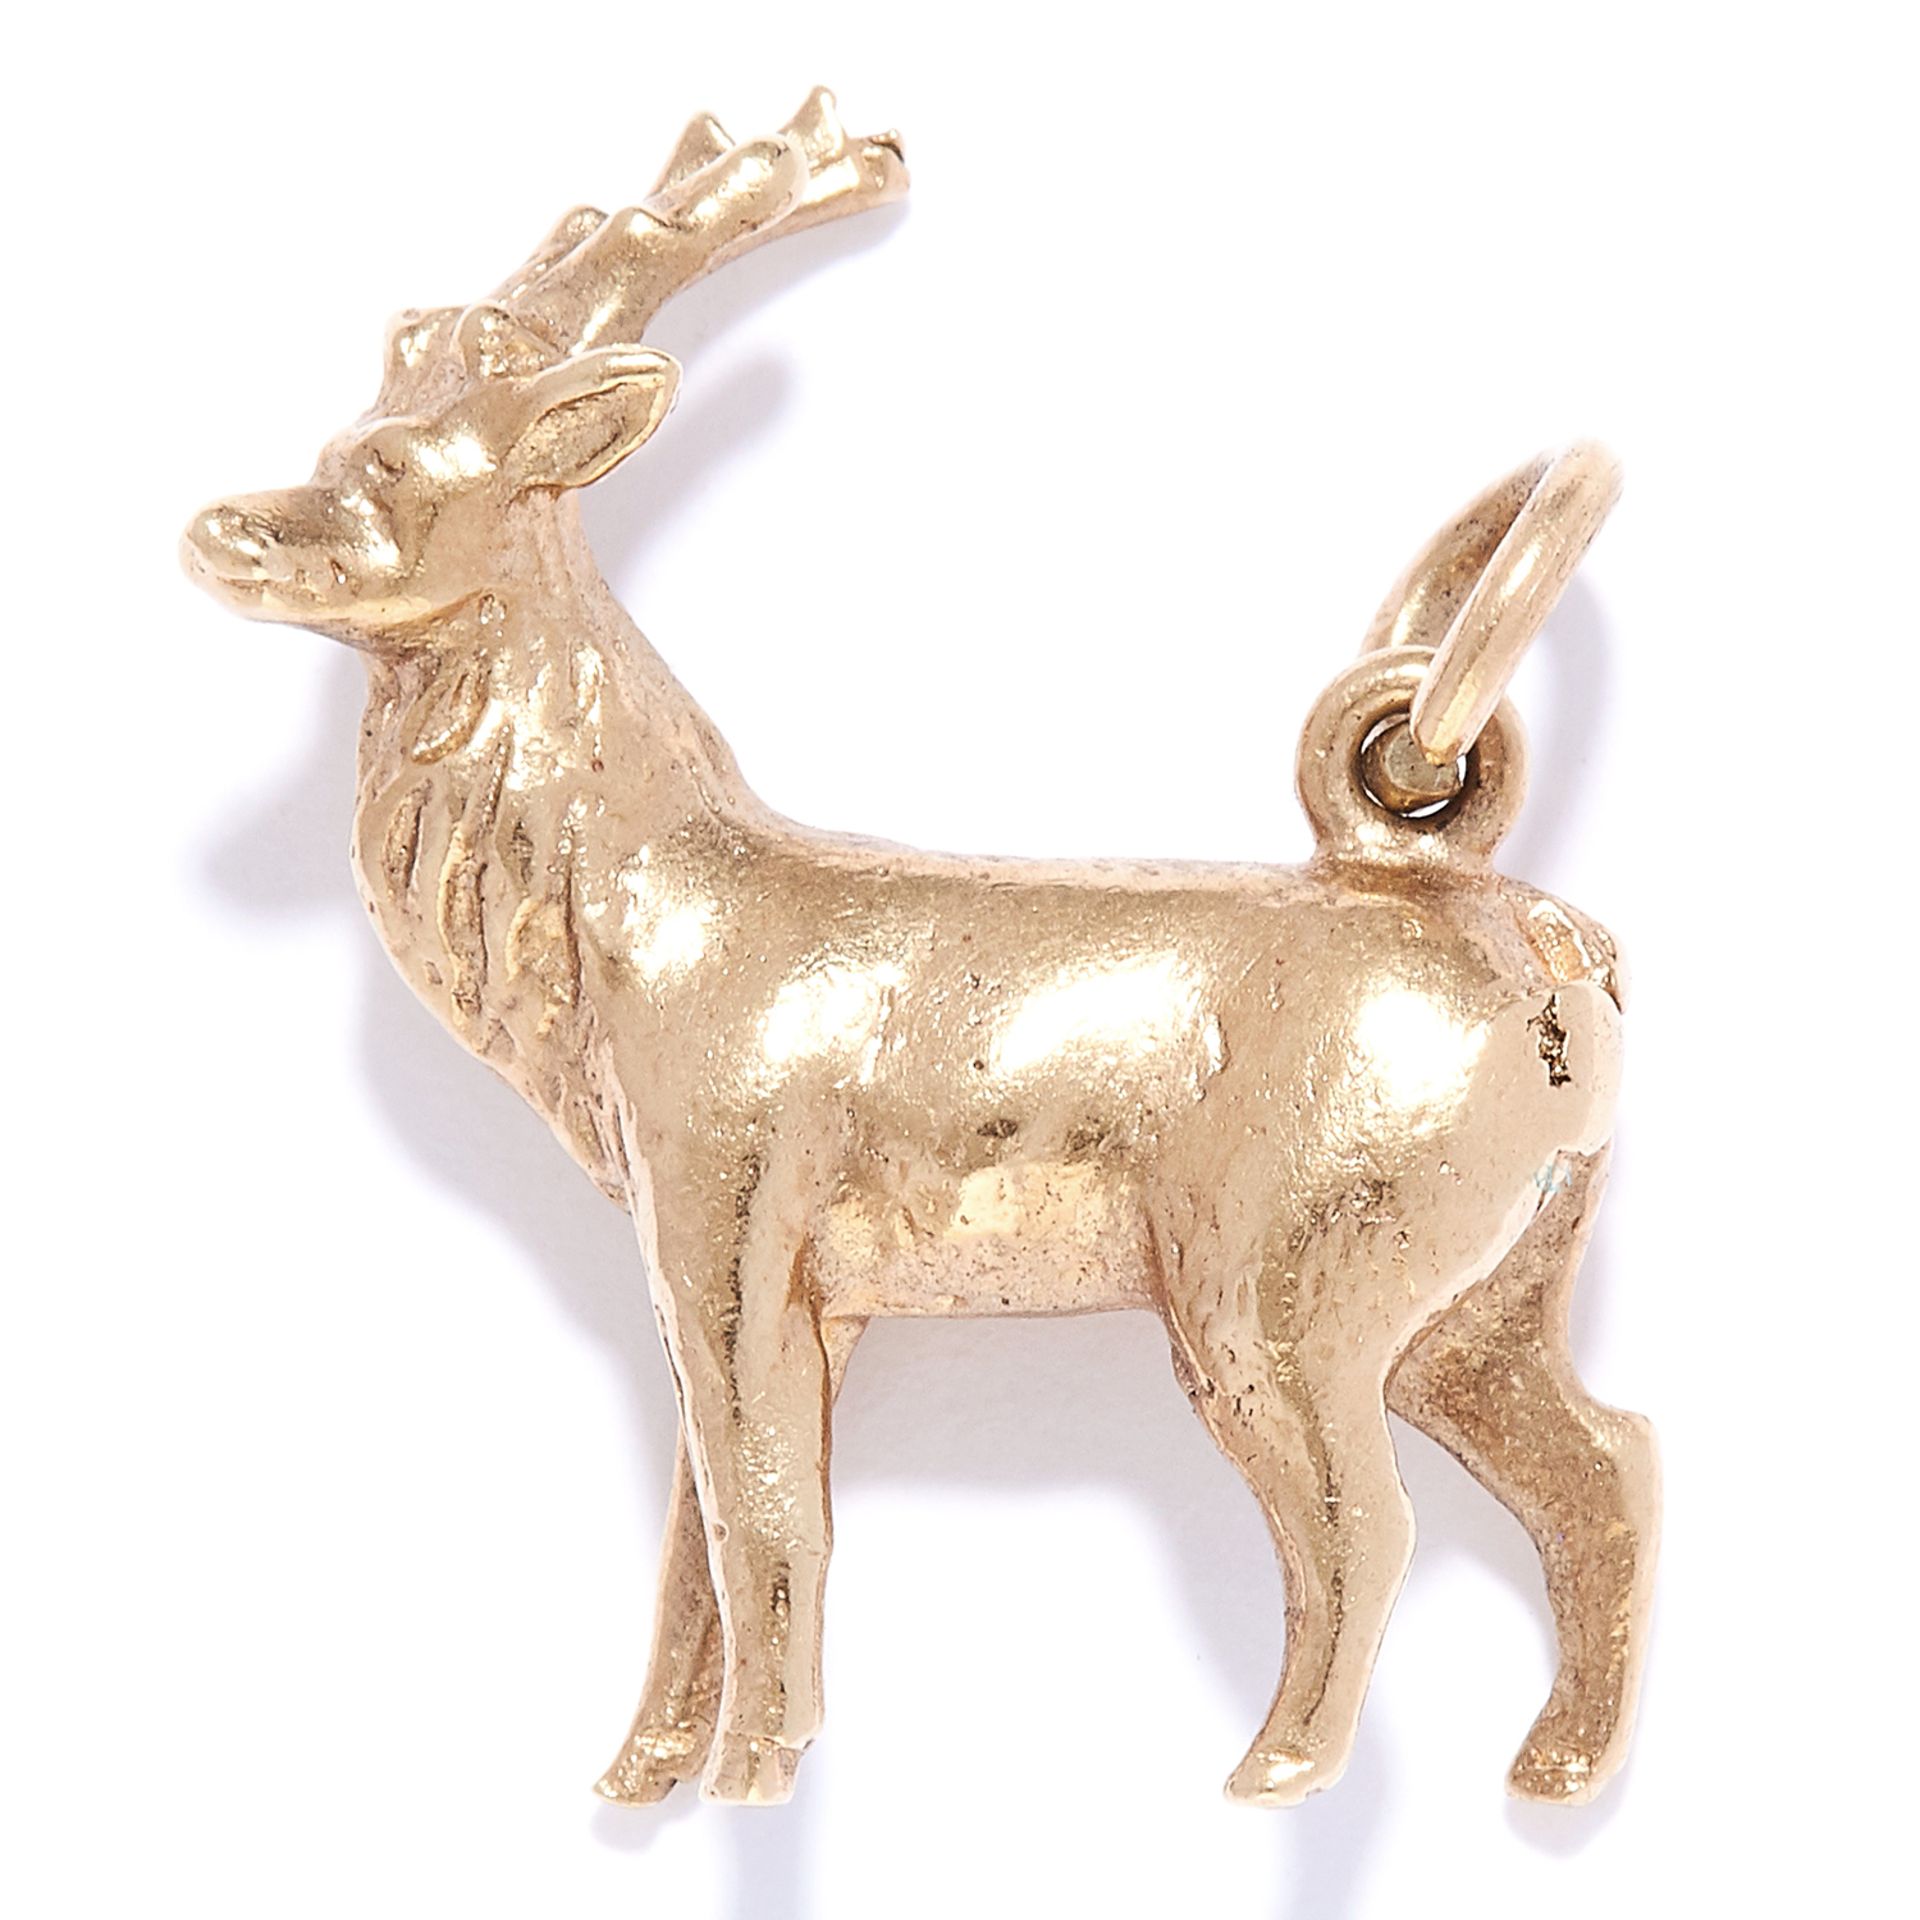 A DEER CHARM / PENDANT in yellow gold, designed as a deer, British hallmarks, 1.7cm, 3.8g.